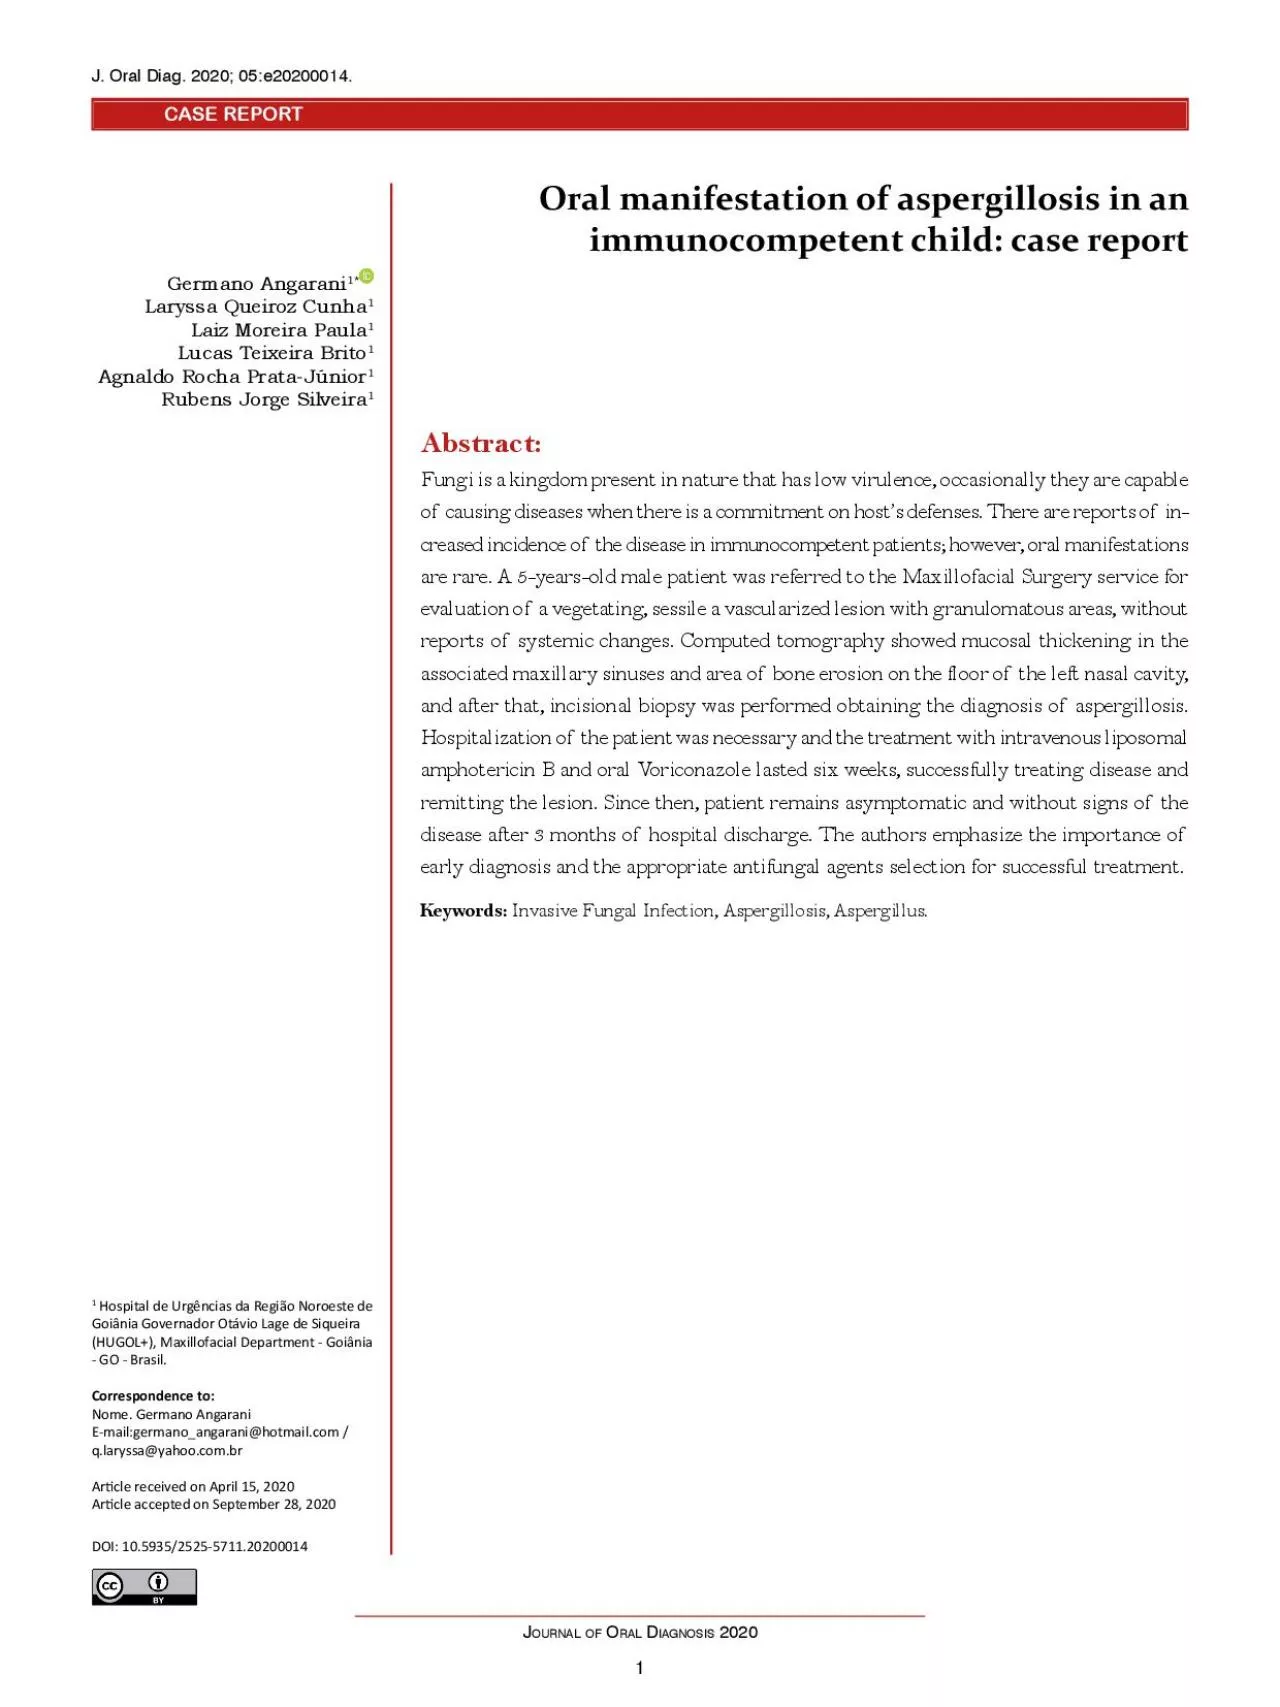 Oral manifestation of aspergillosis in an immunocompetent child case